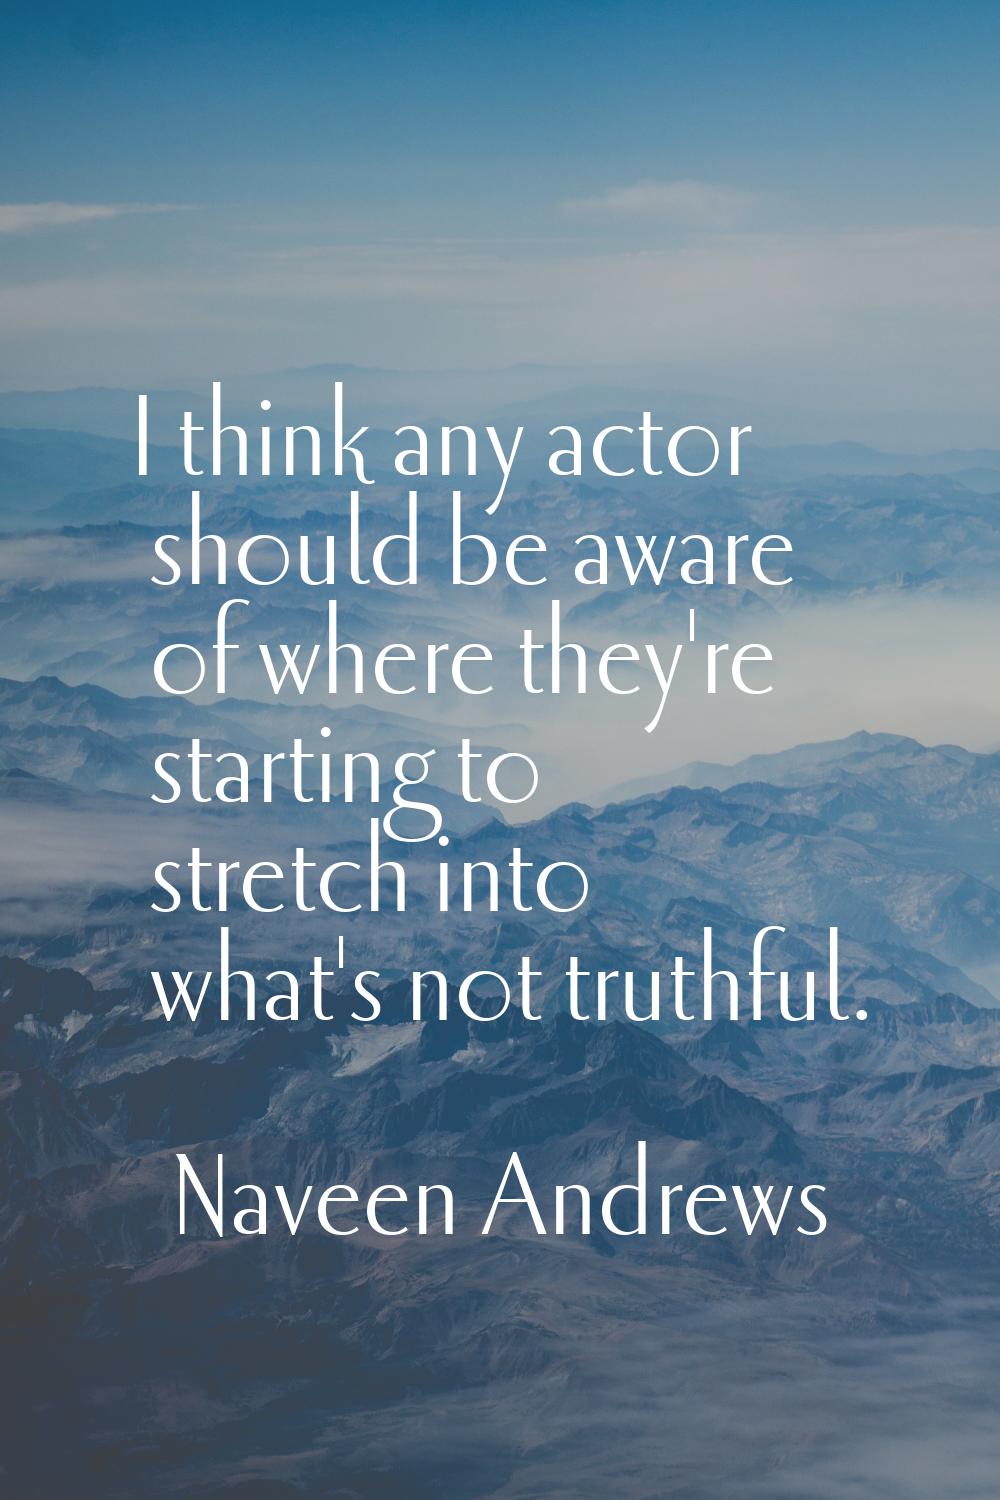 I think any actor should be aware of where they're starting to stretch into what's not truthful.